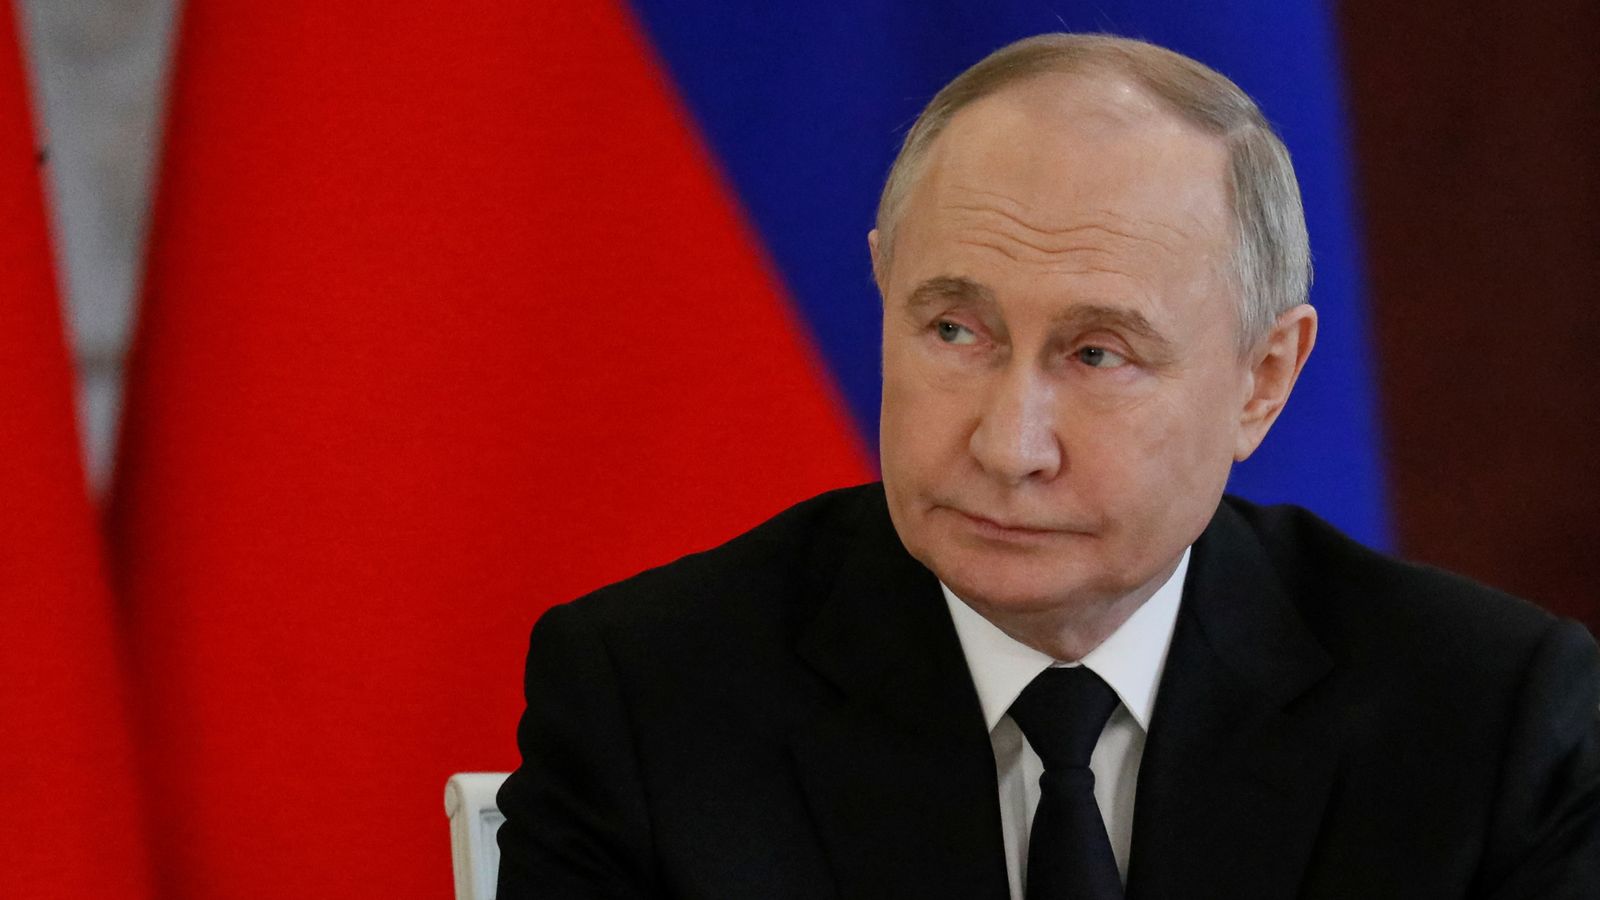 Vladimir Putin ready to 'freeze' war in Ukraine with ceasefire recognising recent Russian gains, sources say